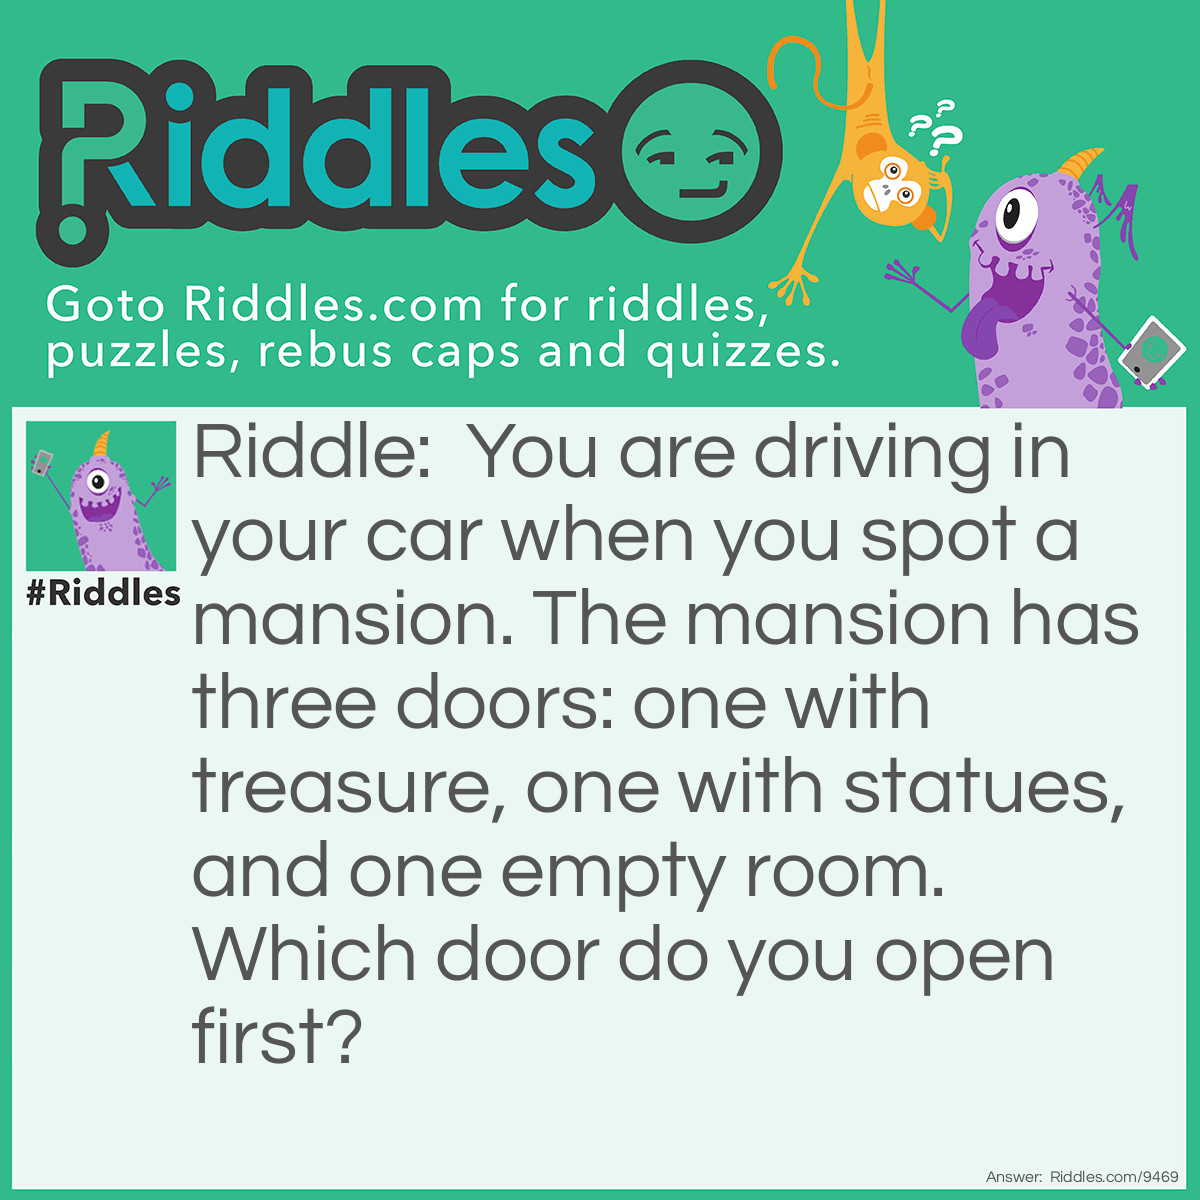 Riddle: You are driving in your car when you spot a mansion. The mansion has three doors: one with treasure, one with statues, and one empty room. Which door do you open first? Answer: The car's door